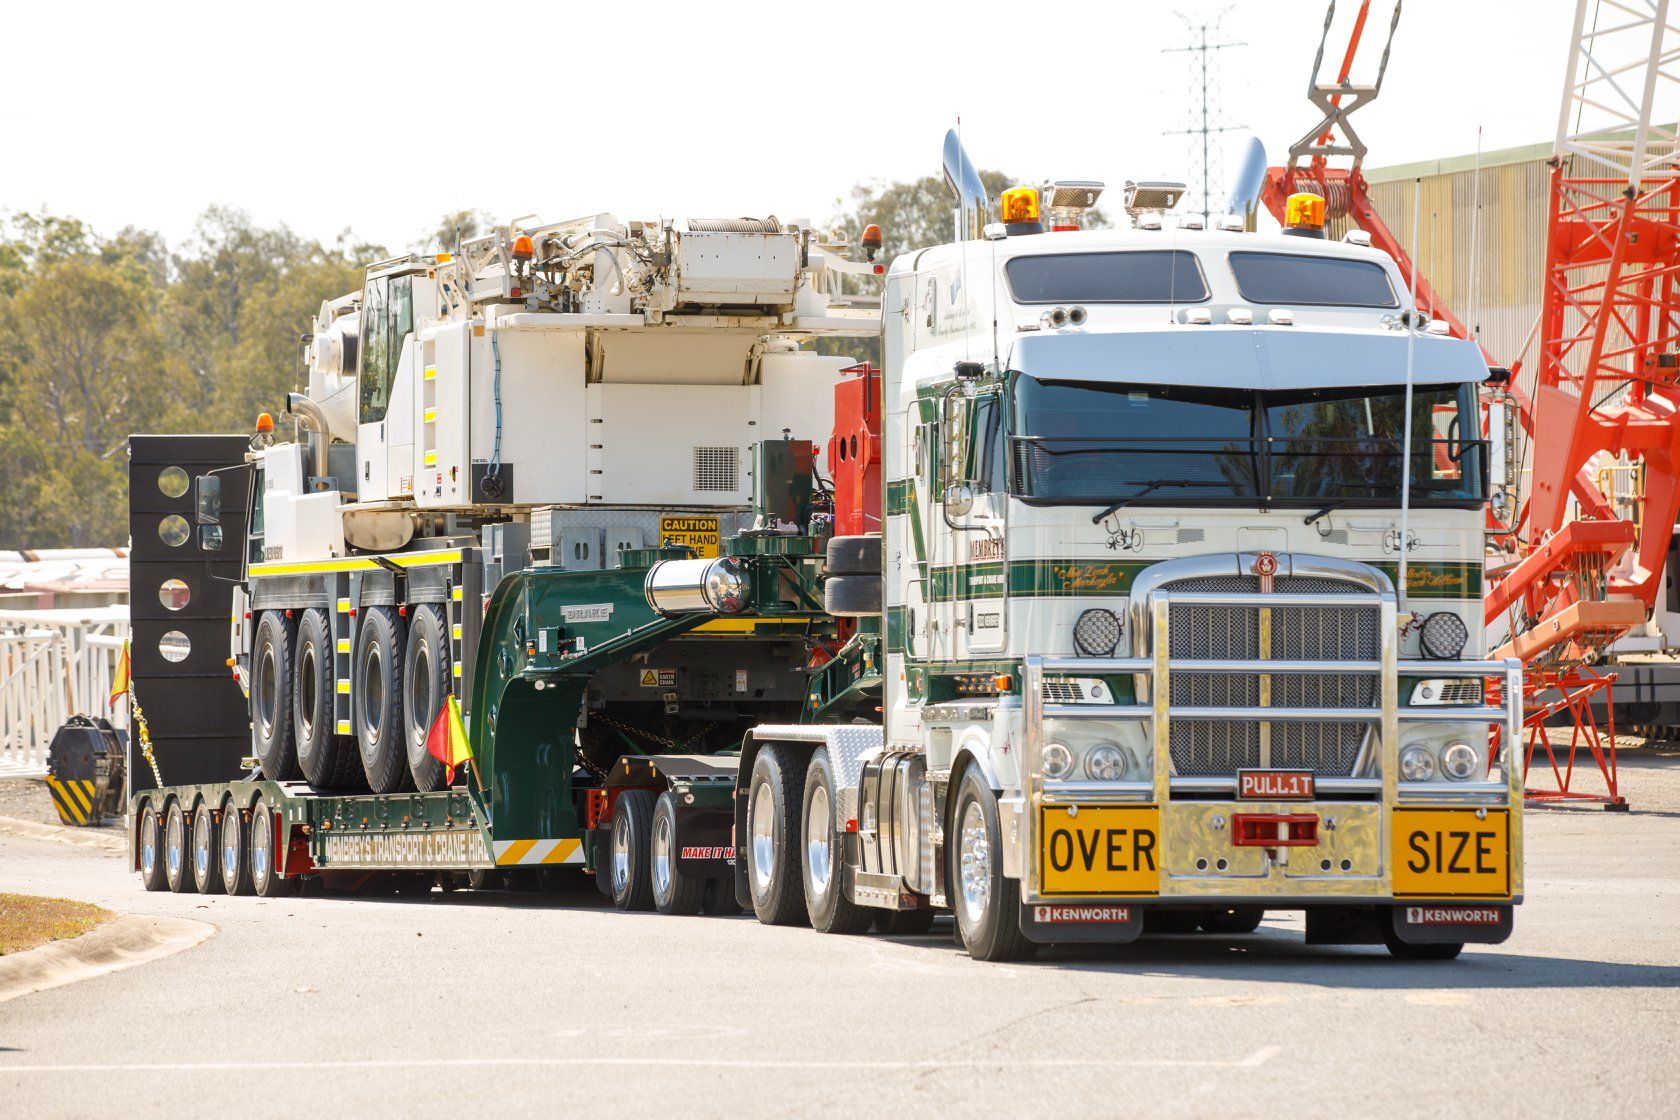 Membrey's Trailer fully loaded with liebherr